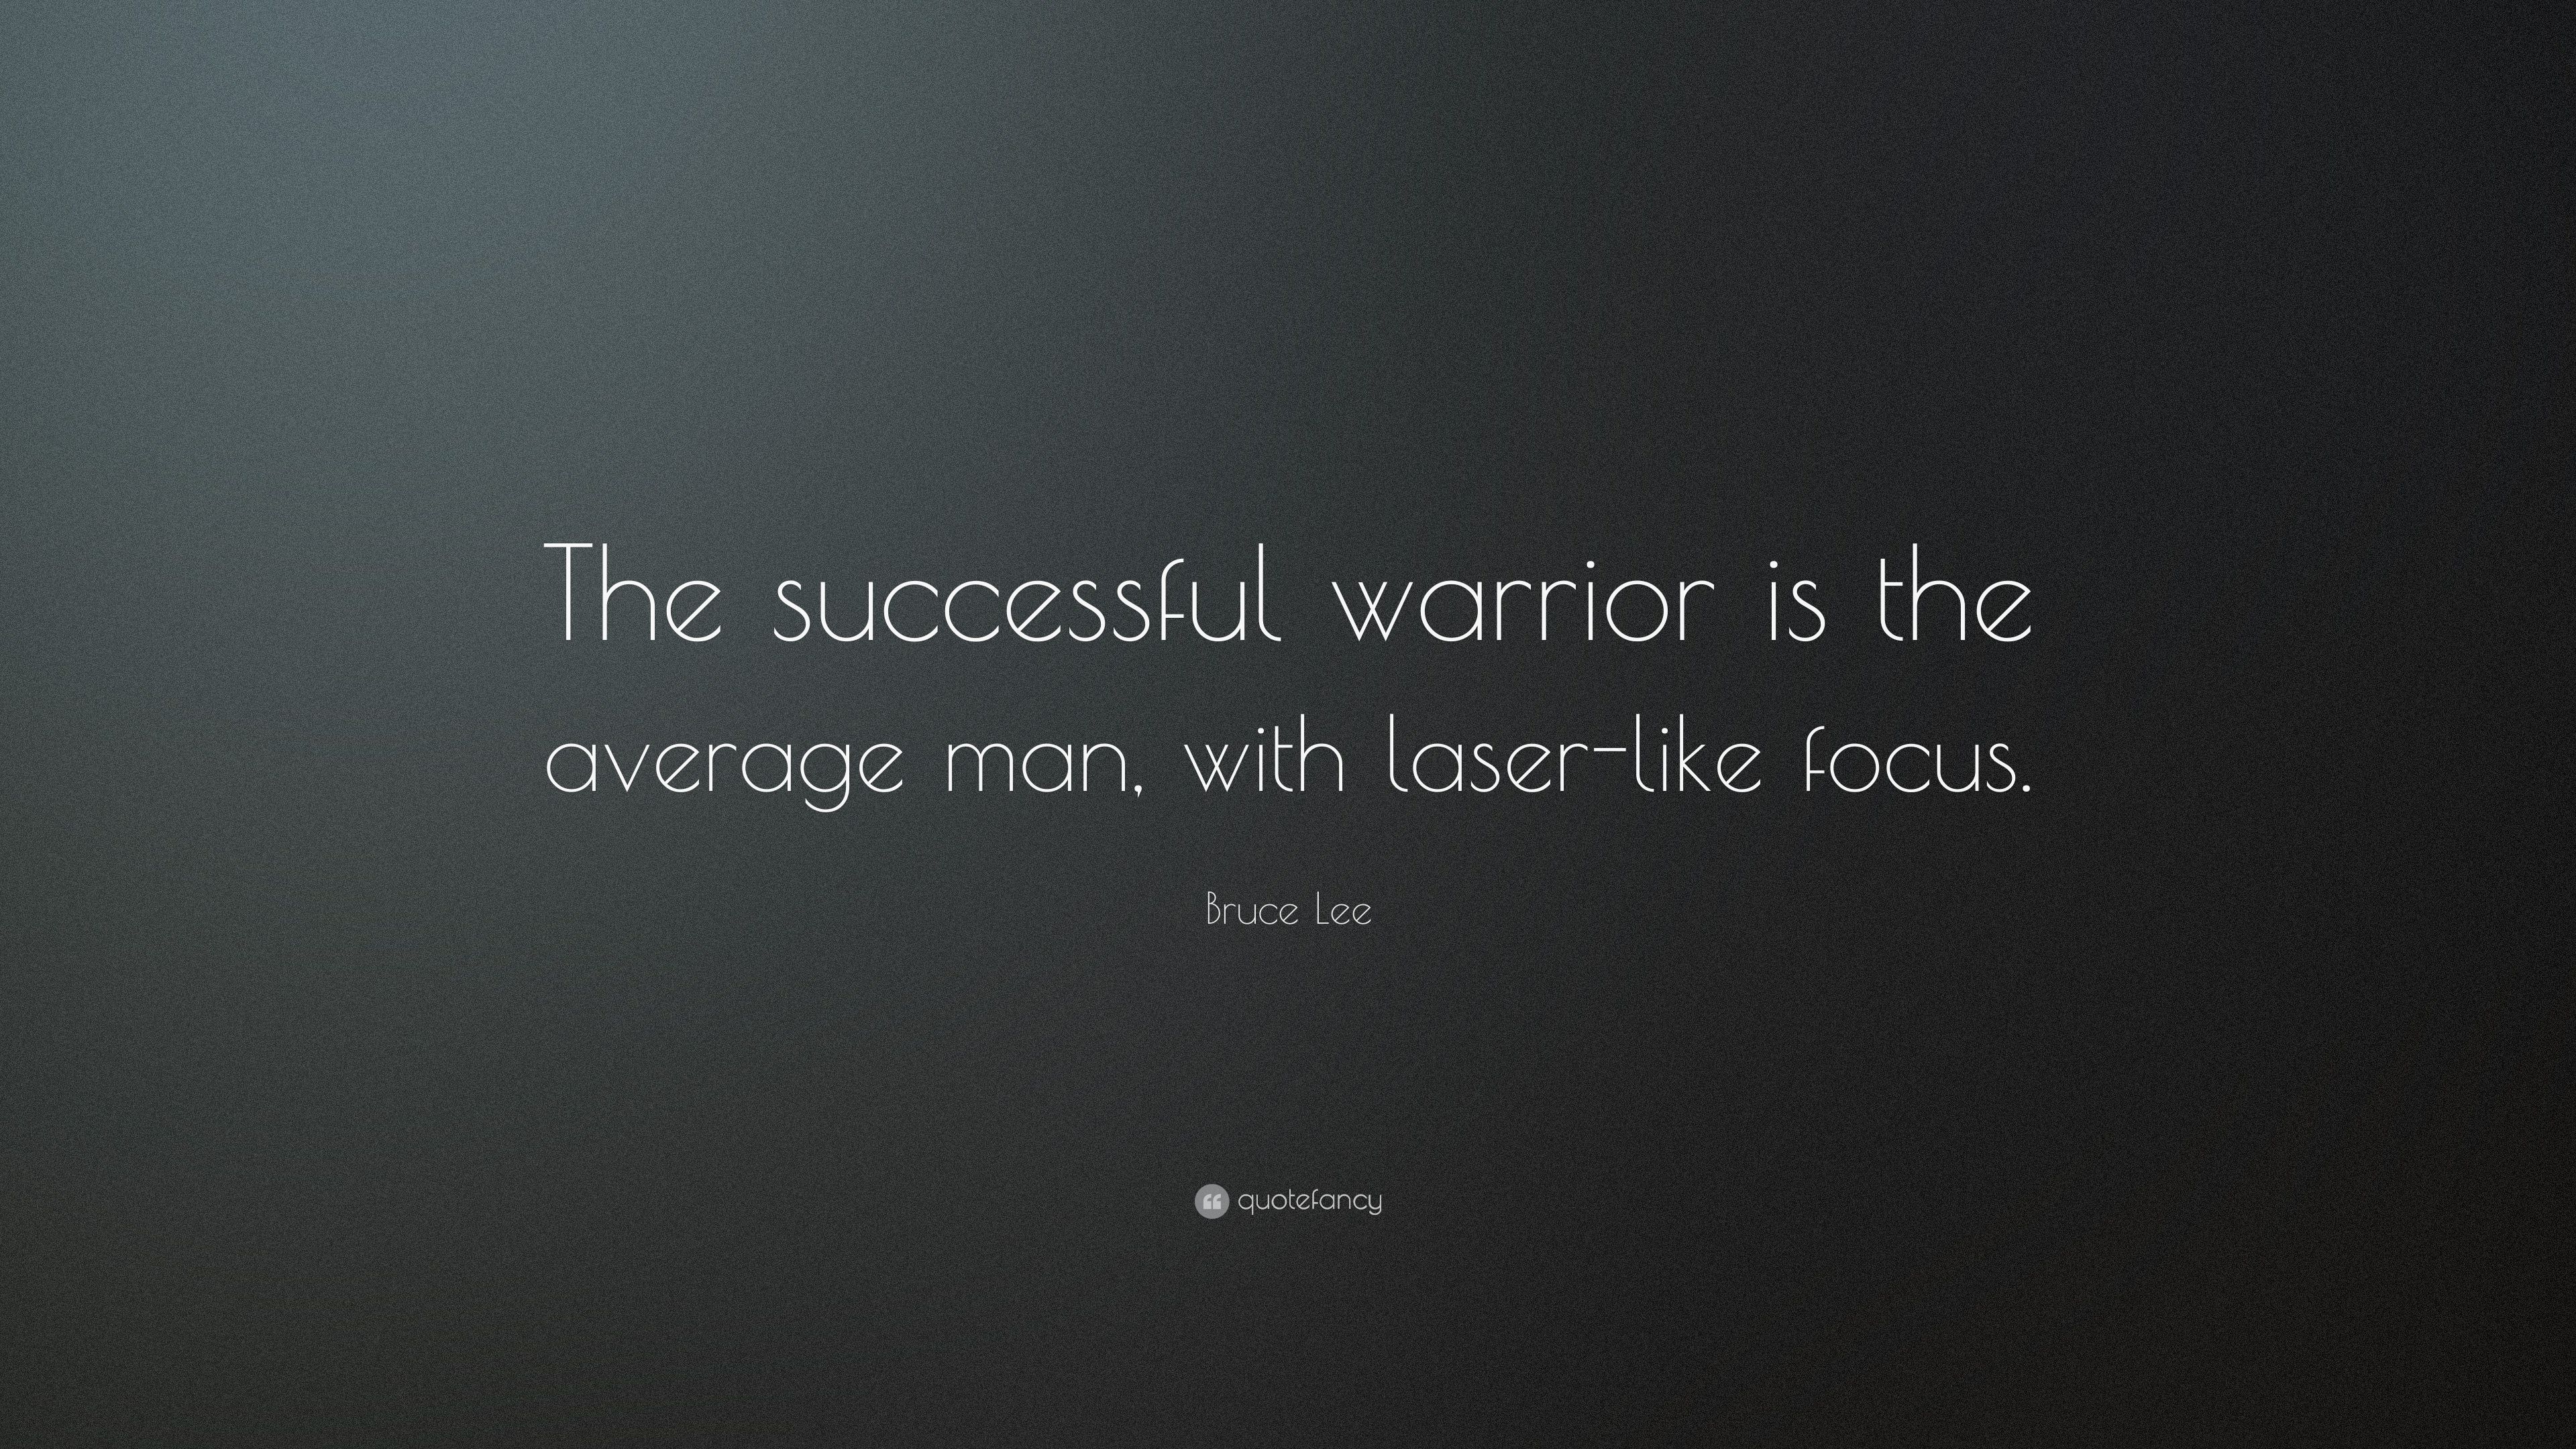 Bruce Lee Quote: “The Successful Warrior Is The Average Man, With Laser Like Focus.” (27 Wallpaper)